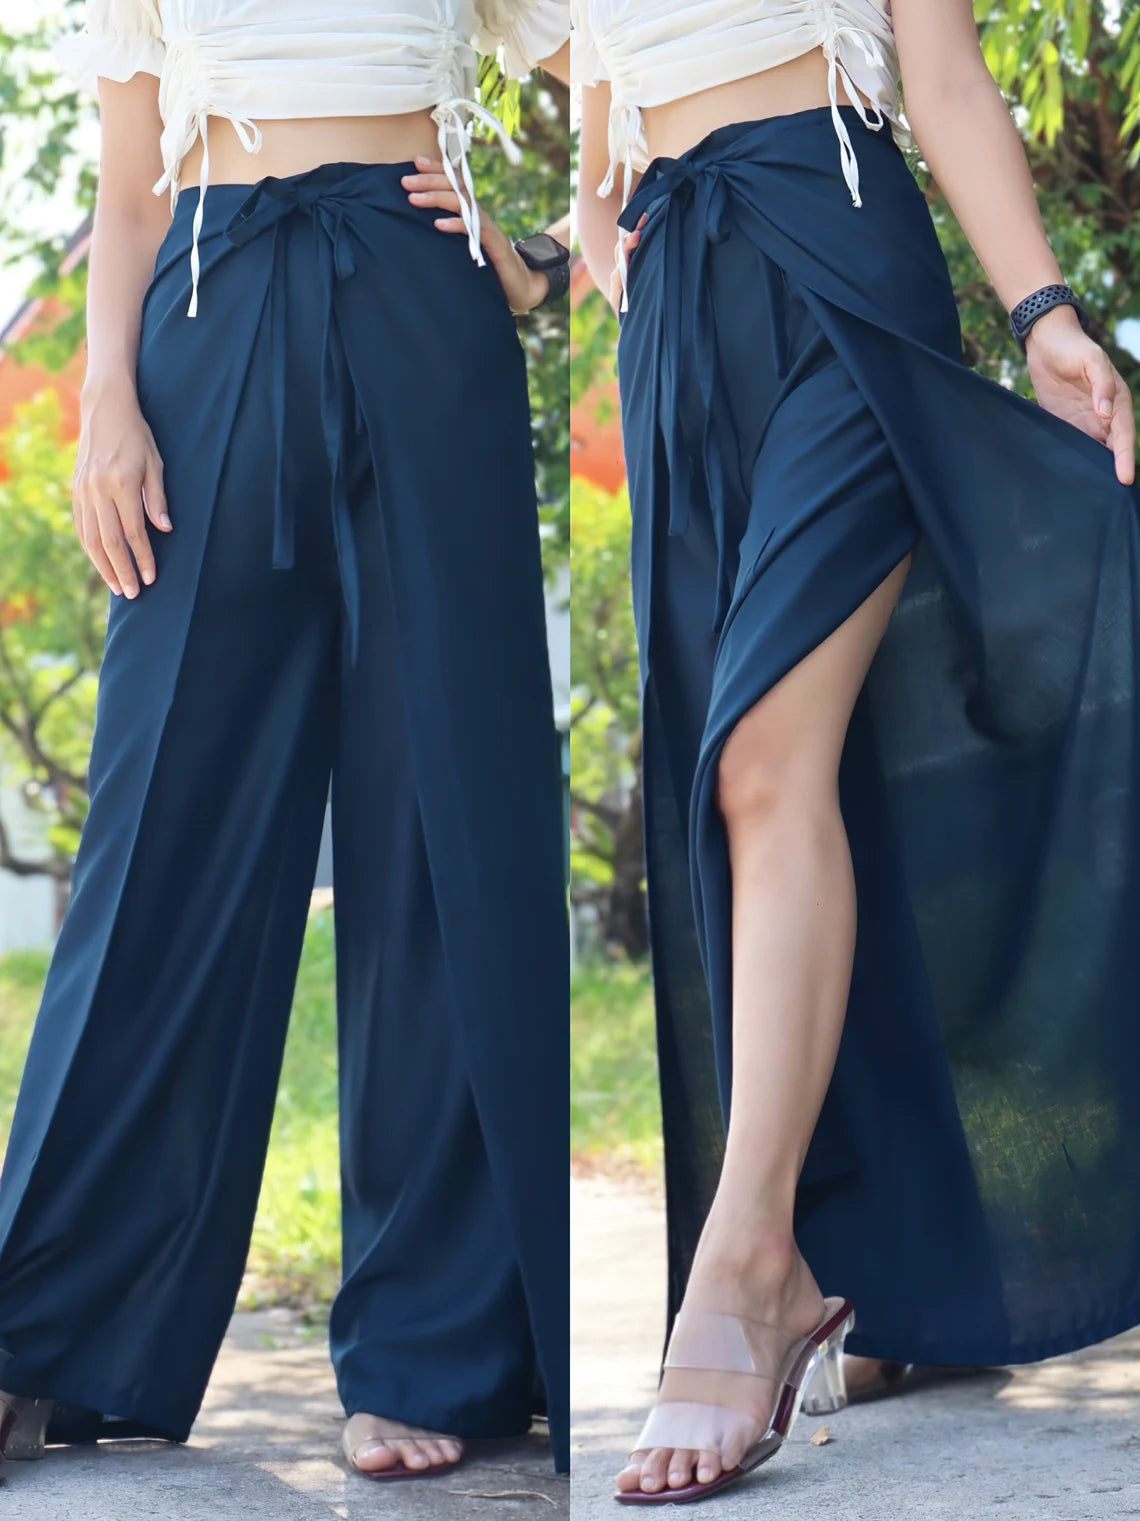 Chic navy blue wrap pants with a tie waist, showcased from different angles to highlight the elegant, flowy design